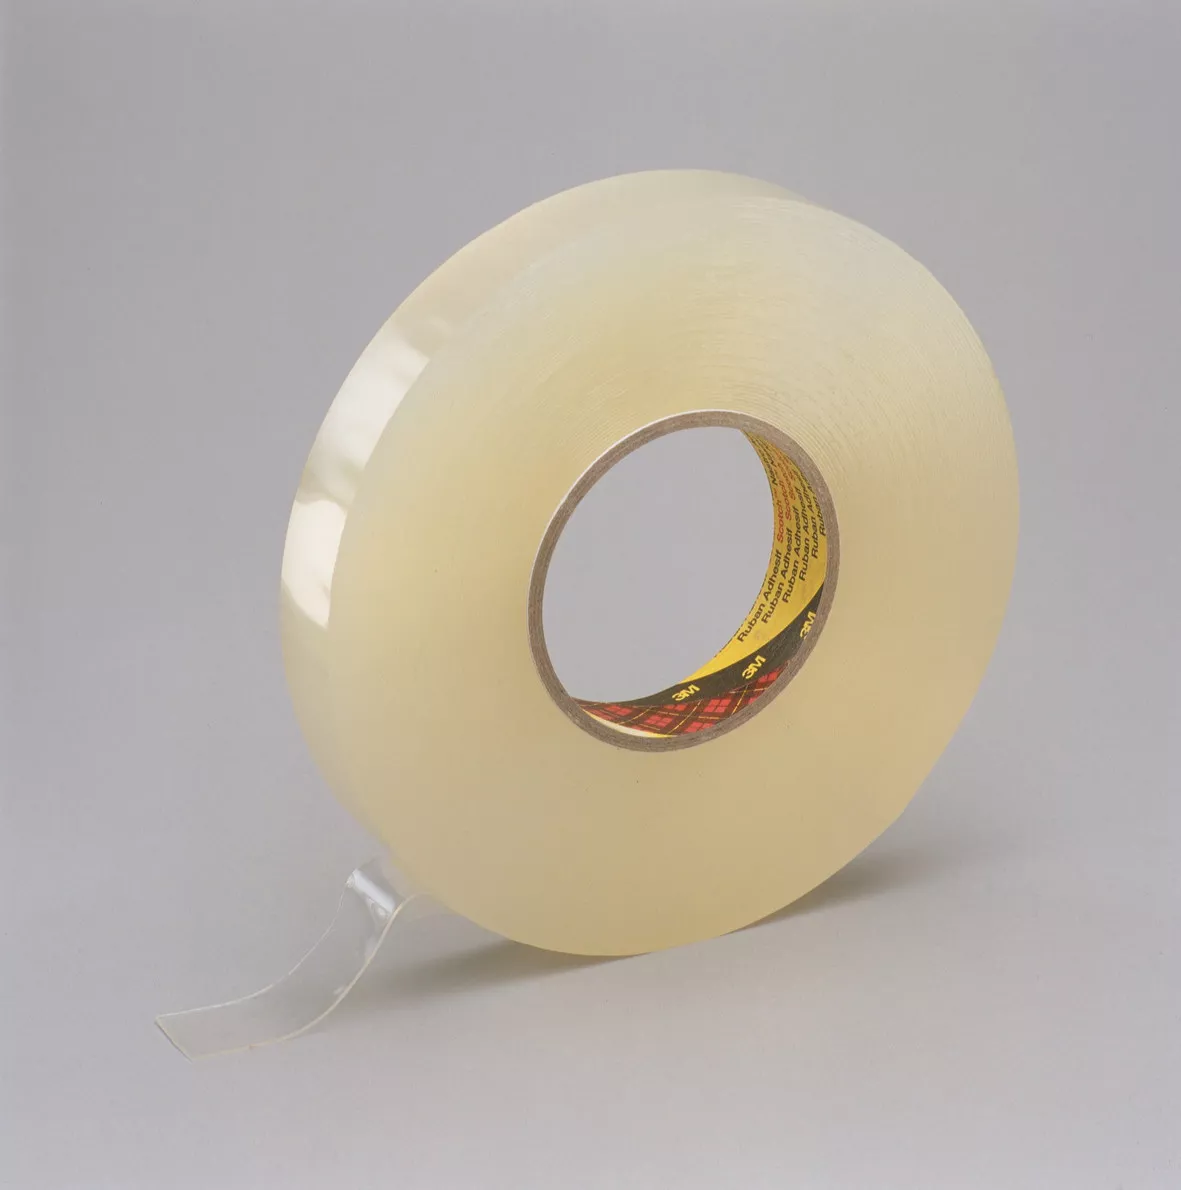 3M™ Double Coated Removable Foam Tape 4658F, Clear, 3/4 in x 27 yd, 31
mil, Film Liner, 2 Roll/Case